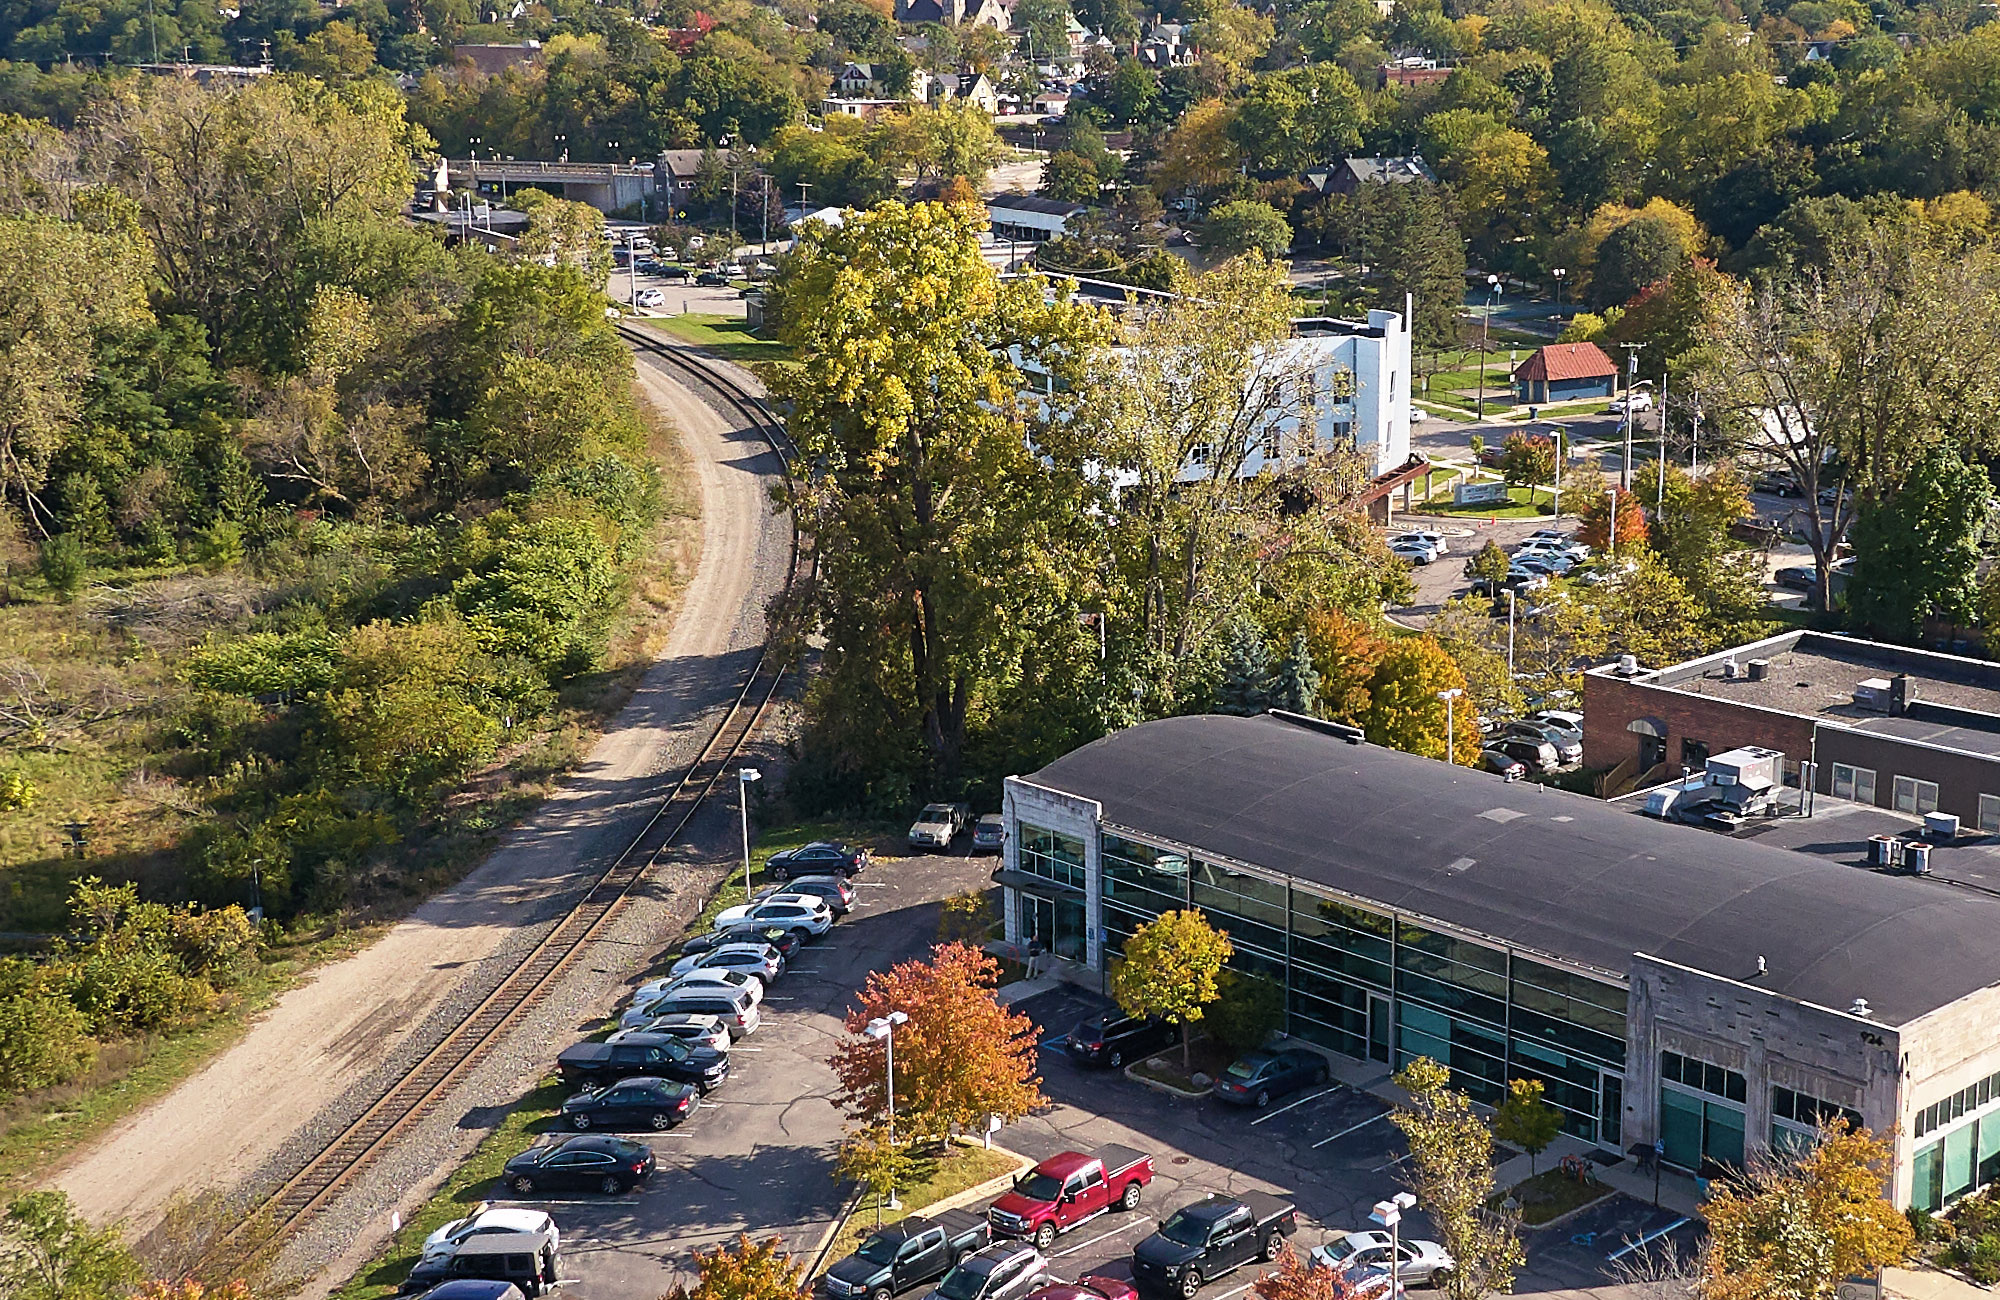 Columbia Asset Management office by train tracks, cars in parking lot, and Ann Arbor trees